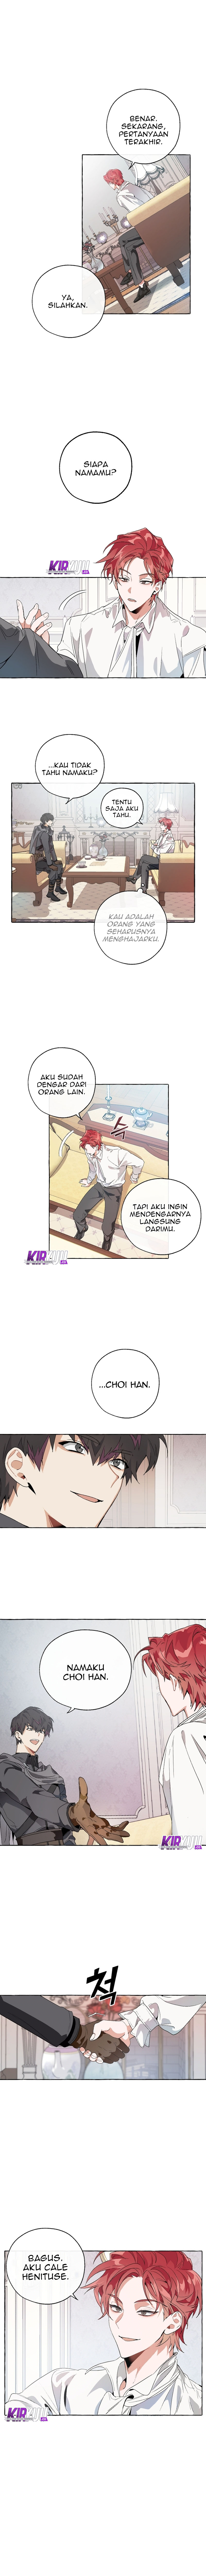 Lord Incheon Chapter 08 - 67